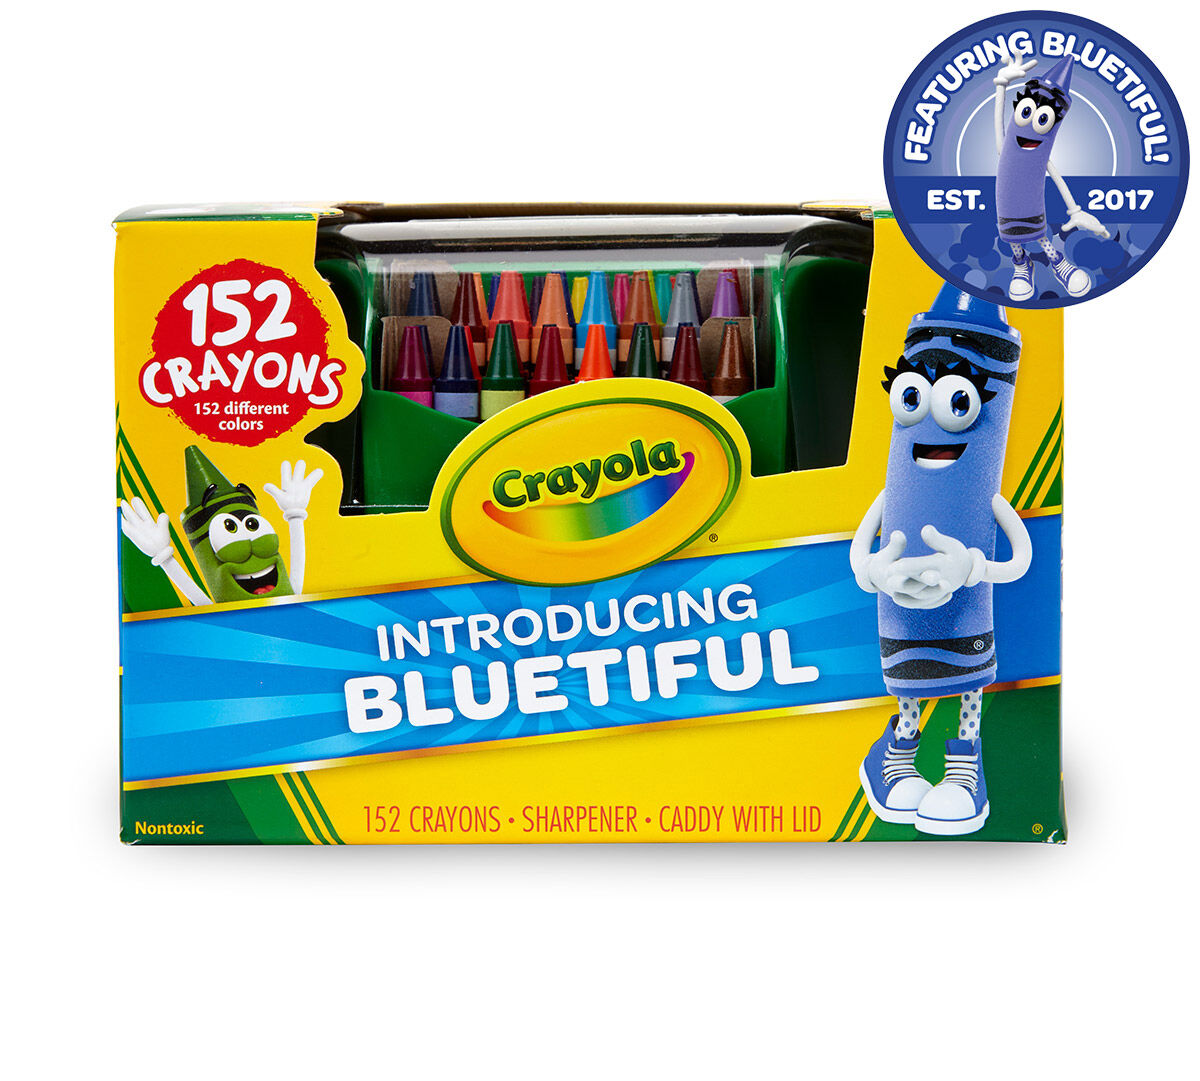 Ultimate Crayon Collection with Bluetiful